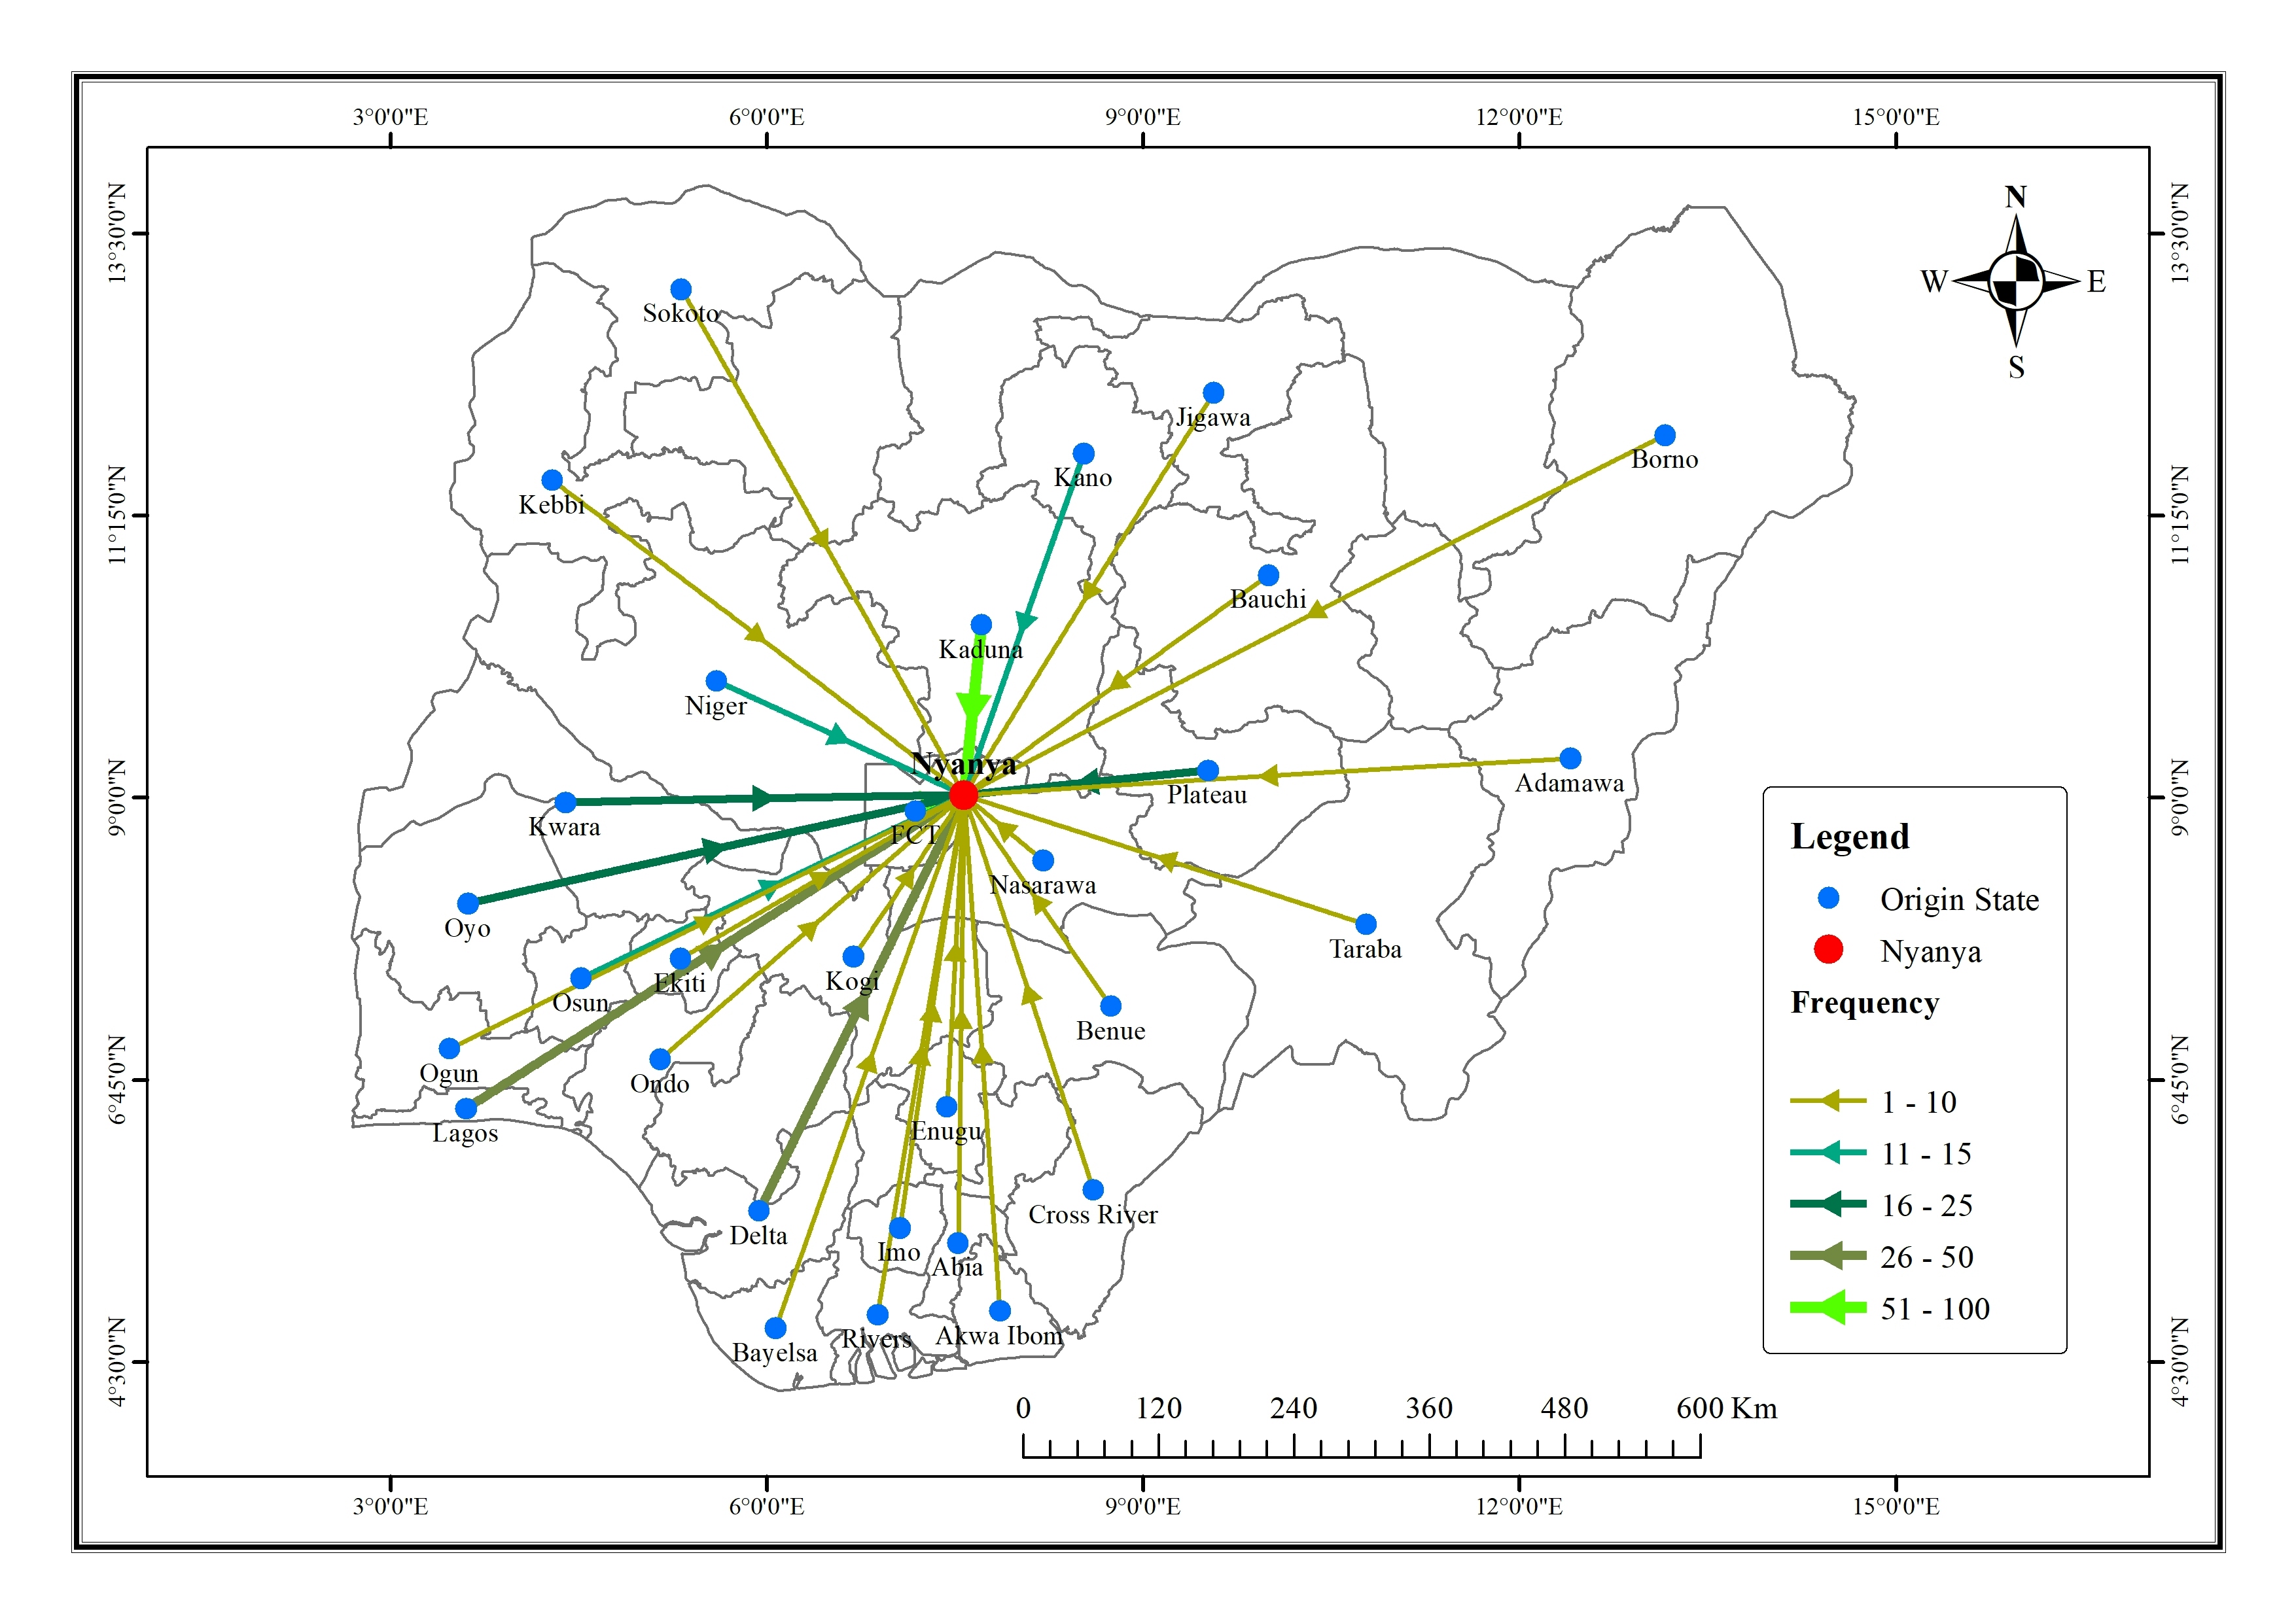 FLOW MAP OF PEOPLE INTO NYANYA, FCT